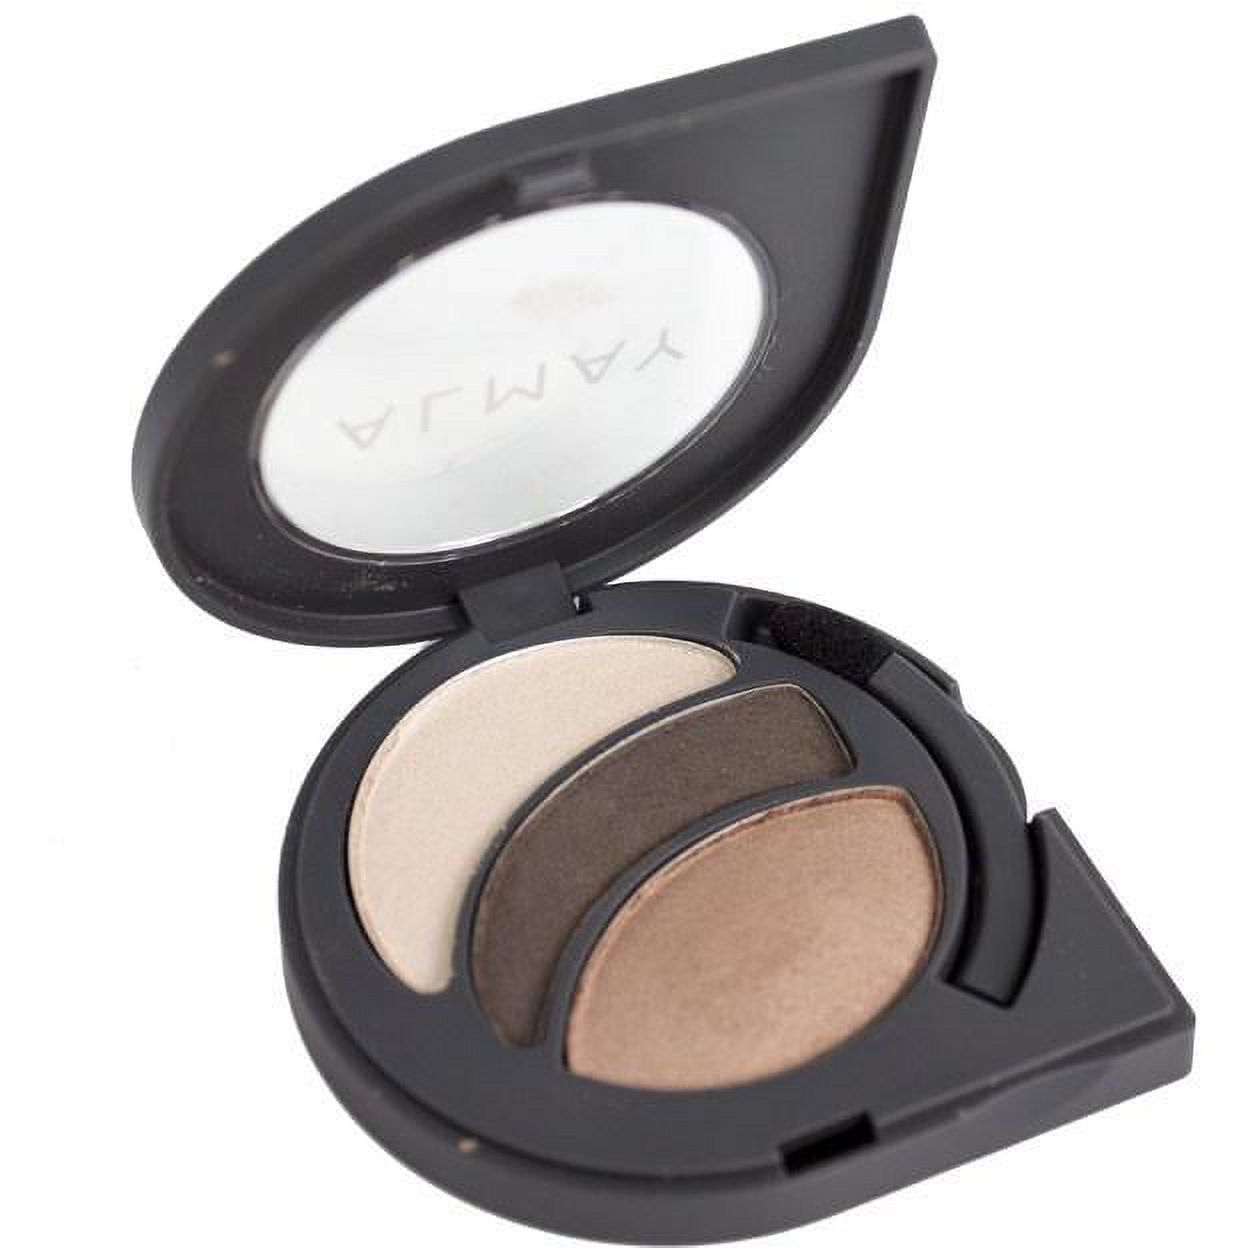 Almay Intense I-Color Everyday Neutrals All Day Wear Powder Eye Shadow, For Brown Eyes - image 4 of 6